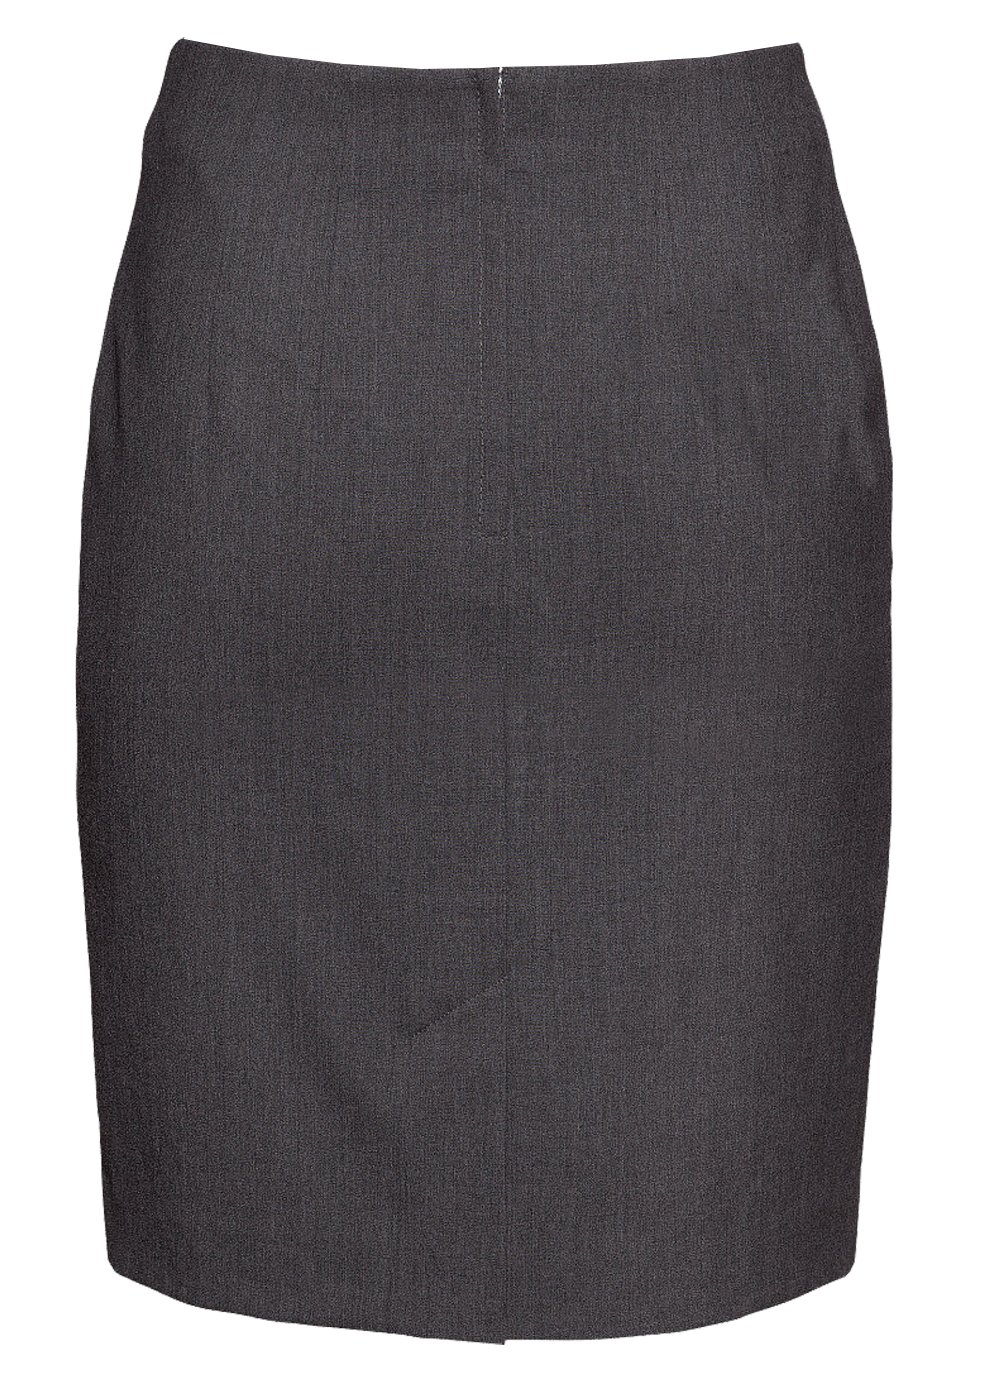 Plus Size Classic Dark Gray polyester wrinkle free pencil skirt ...